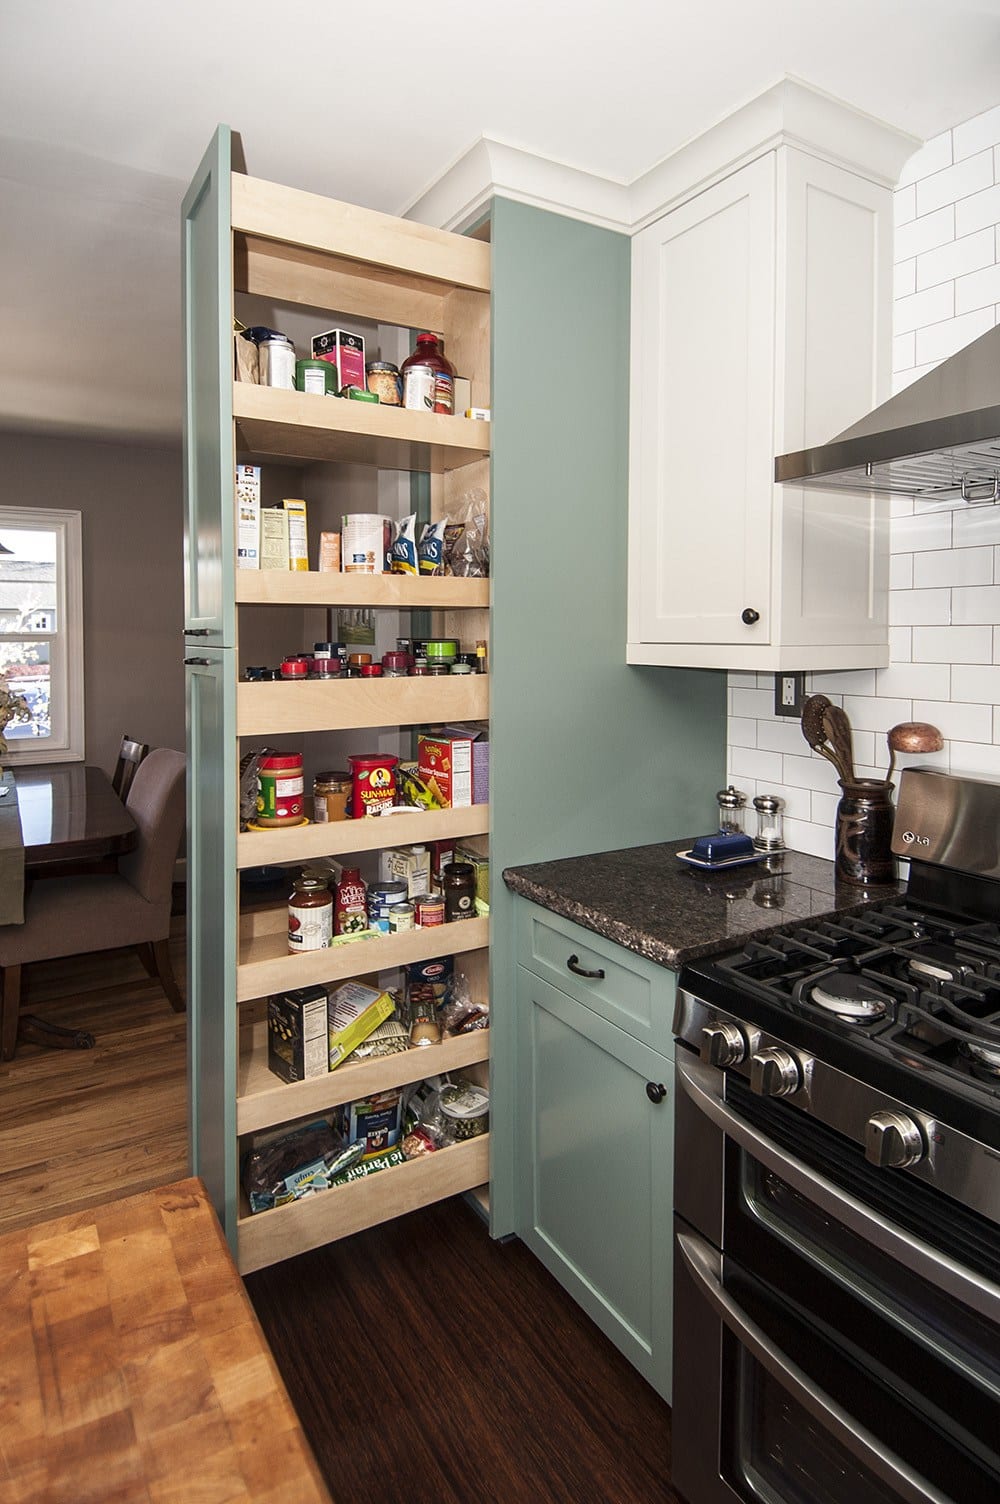 Re-imagining the Kitchen Pantry Cabinet - Mother Hubbard's Custom Cabinetry